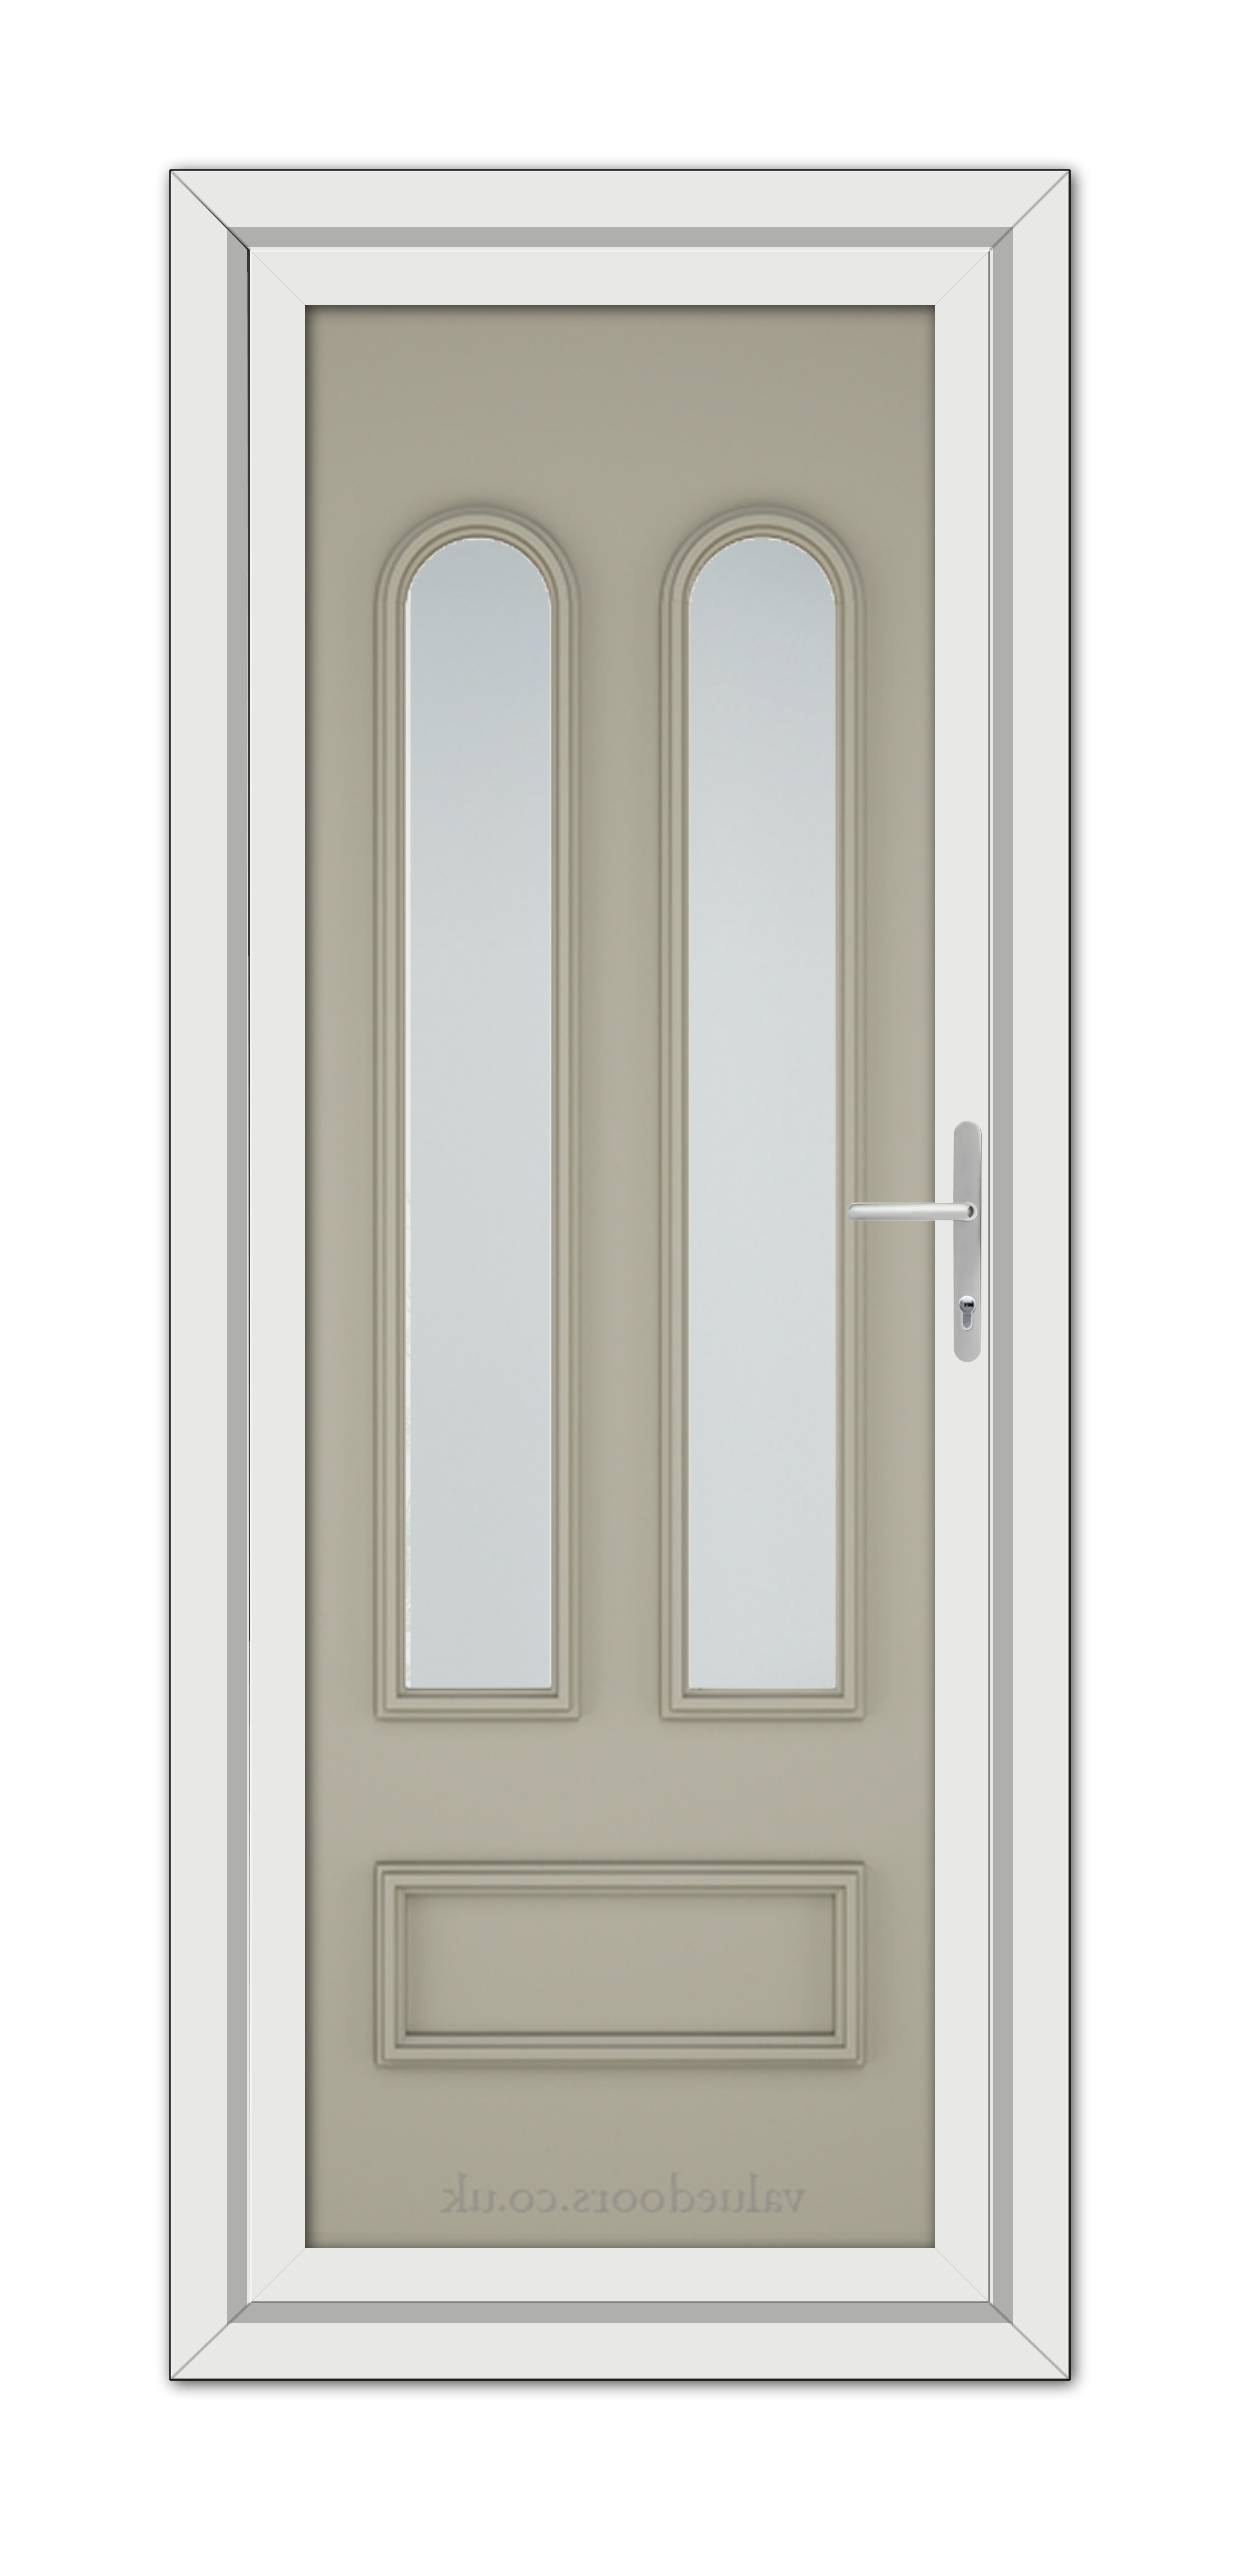 A modern Pebble Grey Madrid uPVC door with a white frame, featuring two vertical, narrow frosted glass panels and a silver handle.